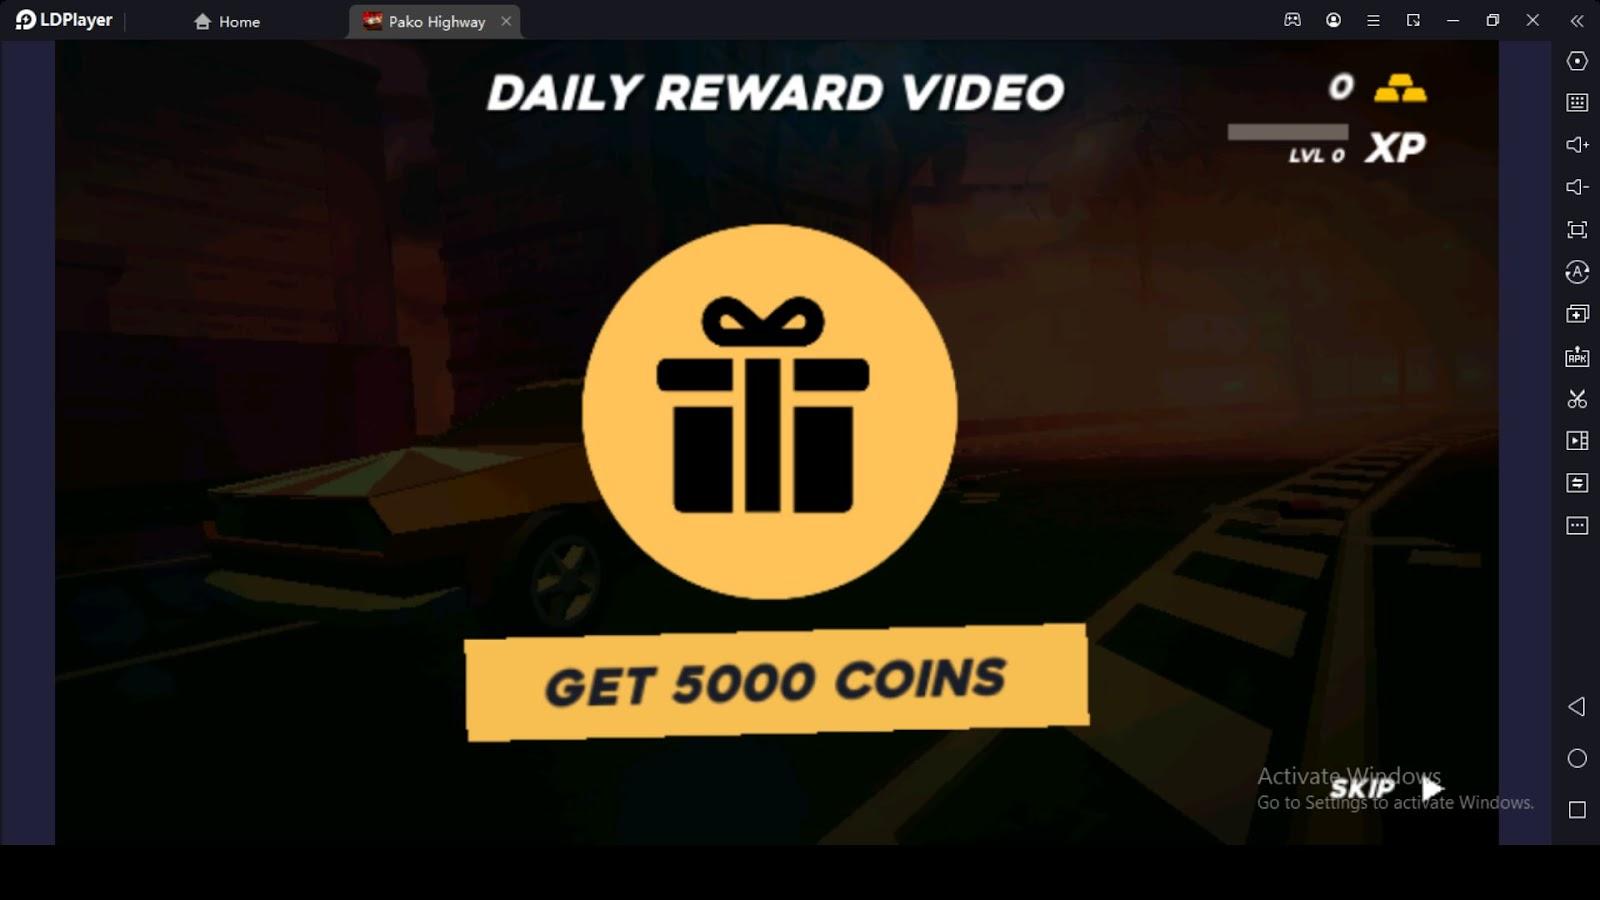 Earn Daily Rewards by Watching Advertisements